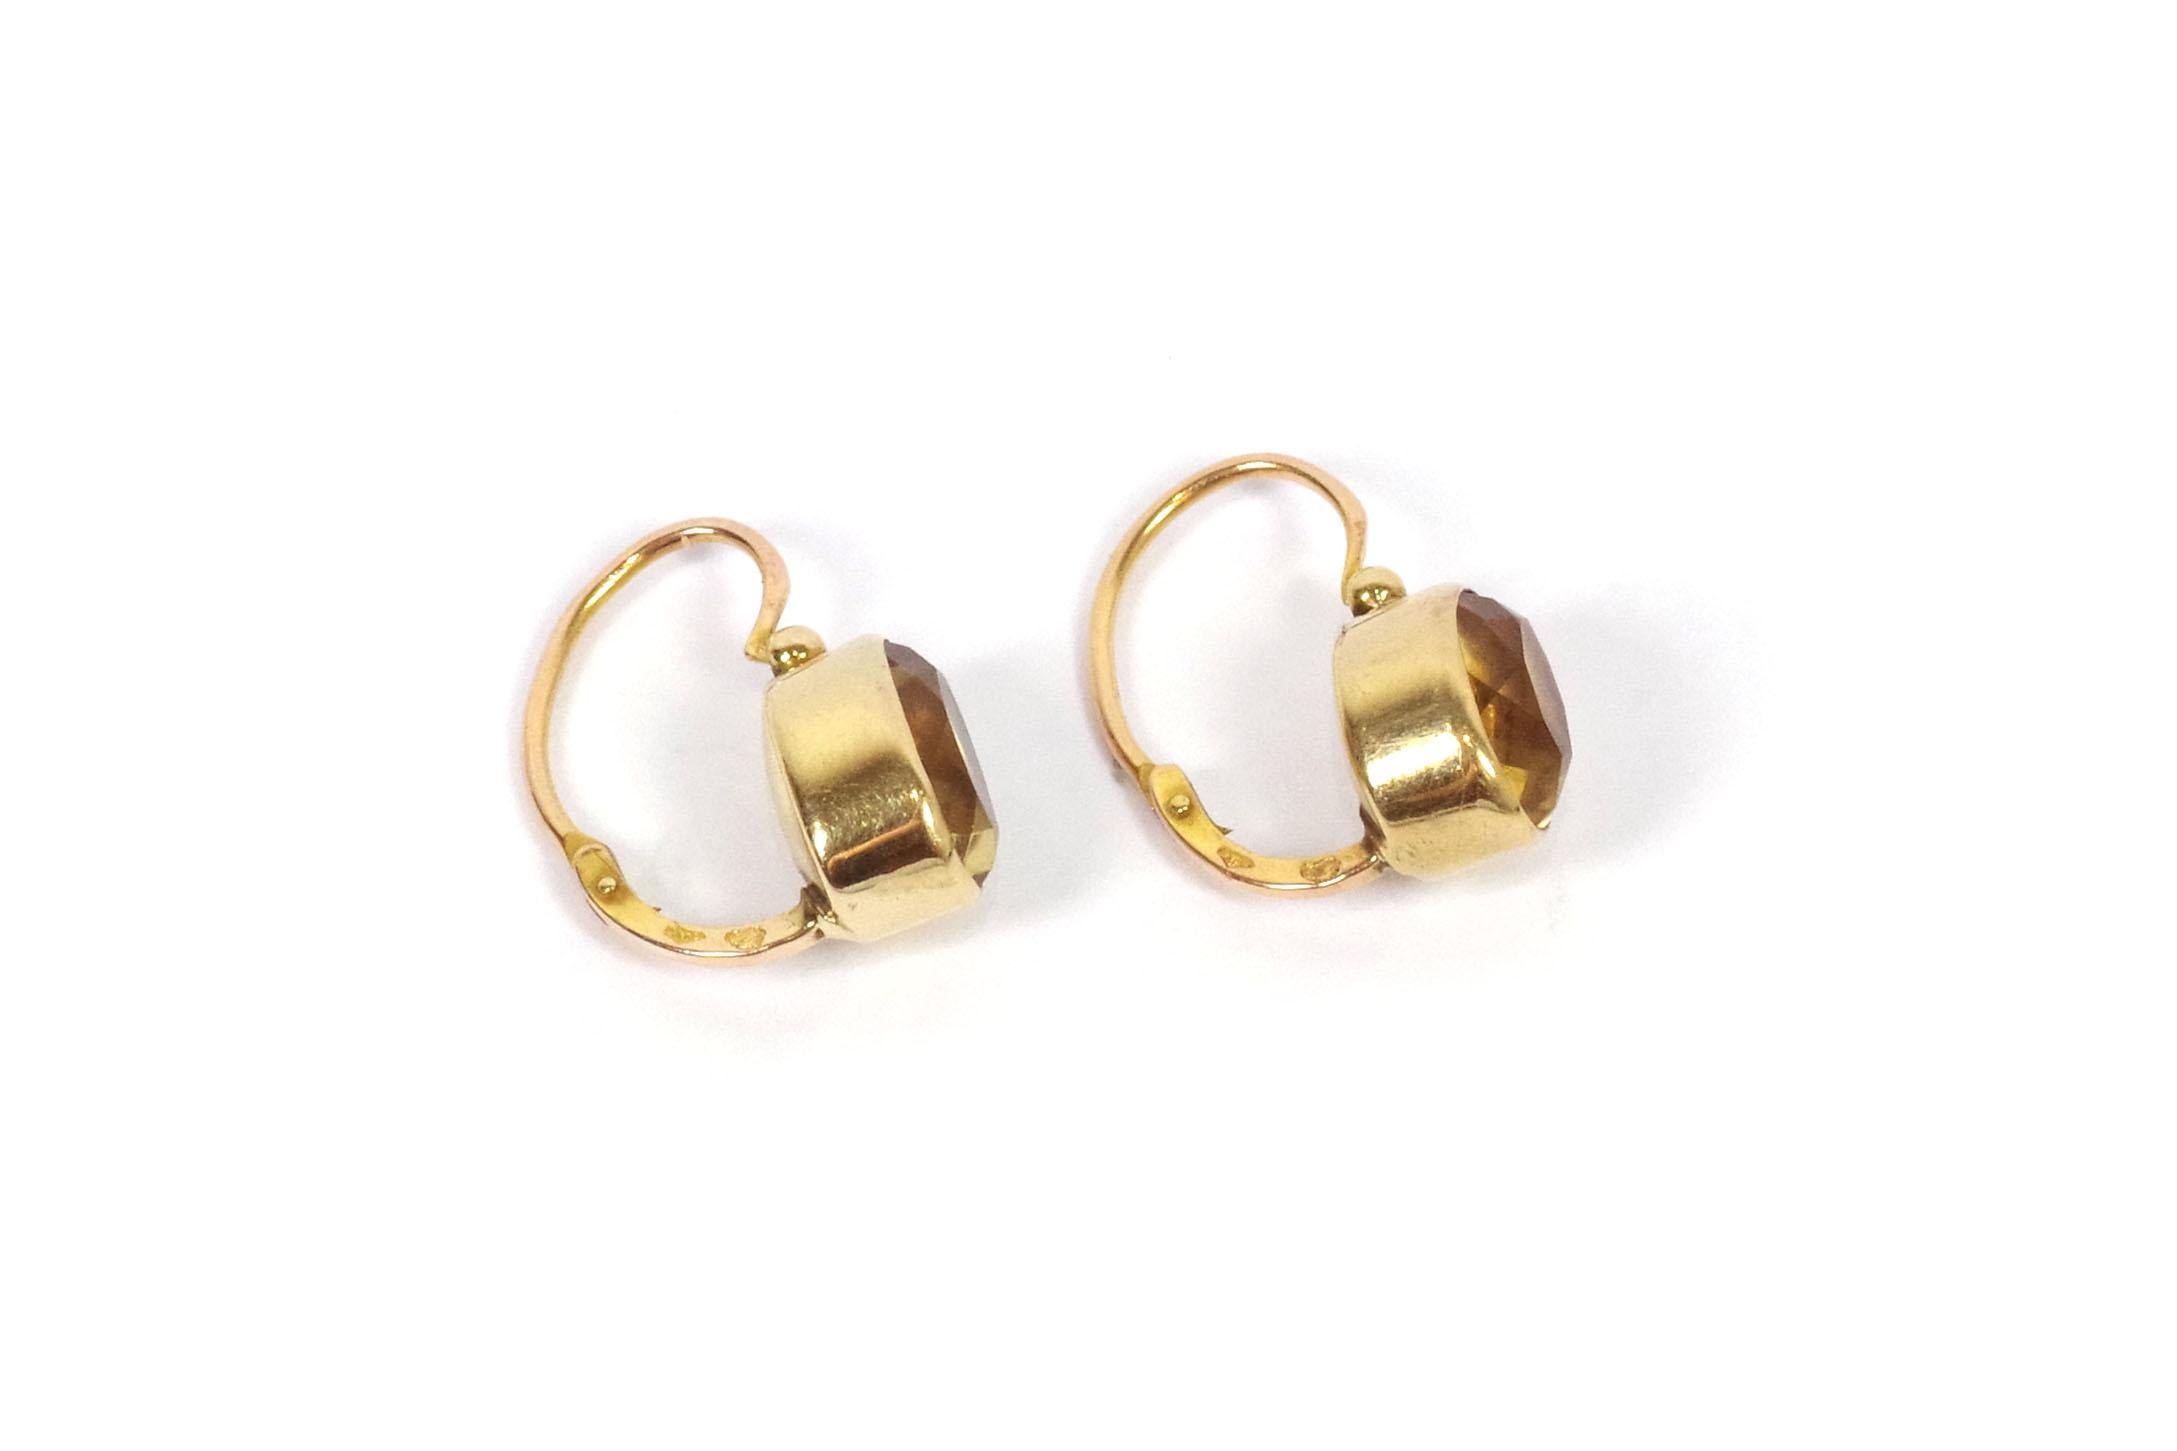 Edwardian gold sleeper earrings in 18 karat rose gold. A pair of earrings featuring a faceted oval yellow glass, imitating citrine, in a closed setting. These are antique earrings from the early 20th century, originating from France.

They bear the